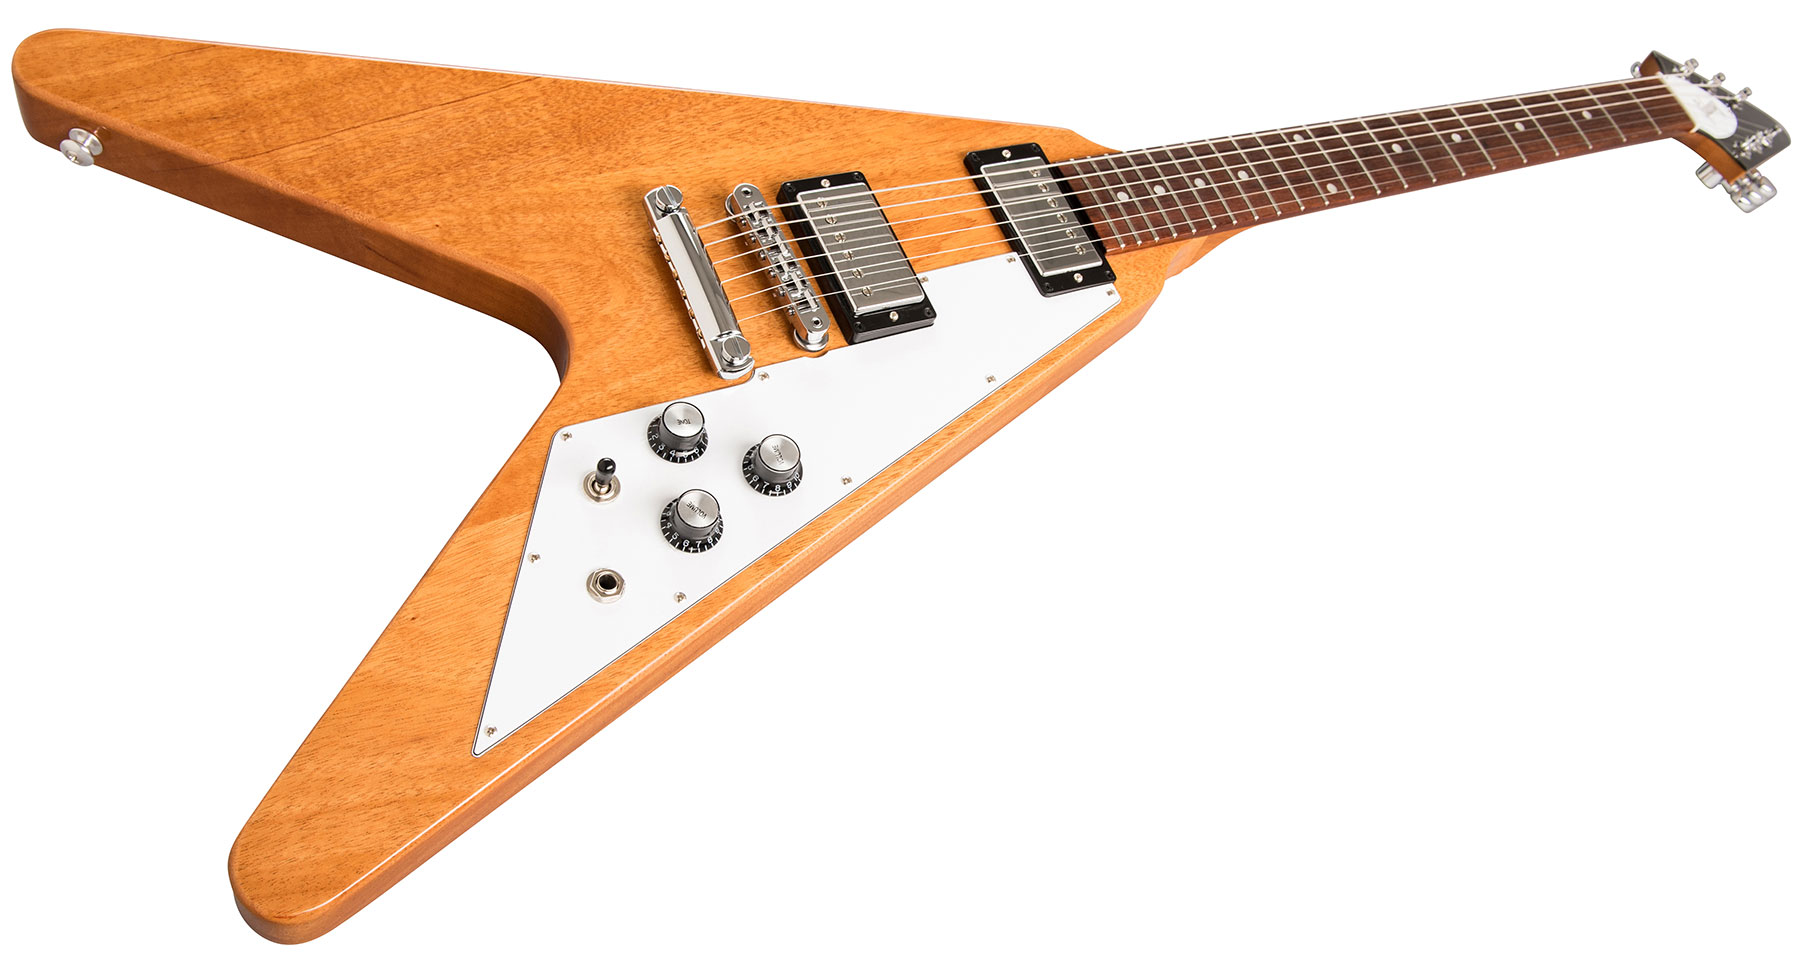 Gibson Flying V 2019 Hh Ht Rw - Antique Natural - Guitarra electrica metalica - Variation 1